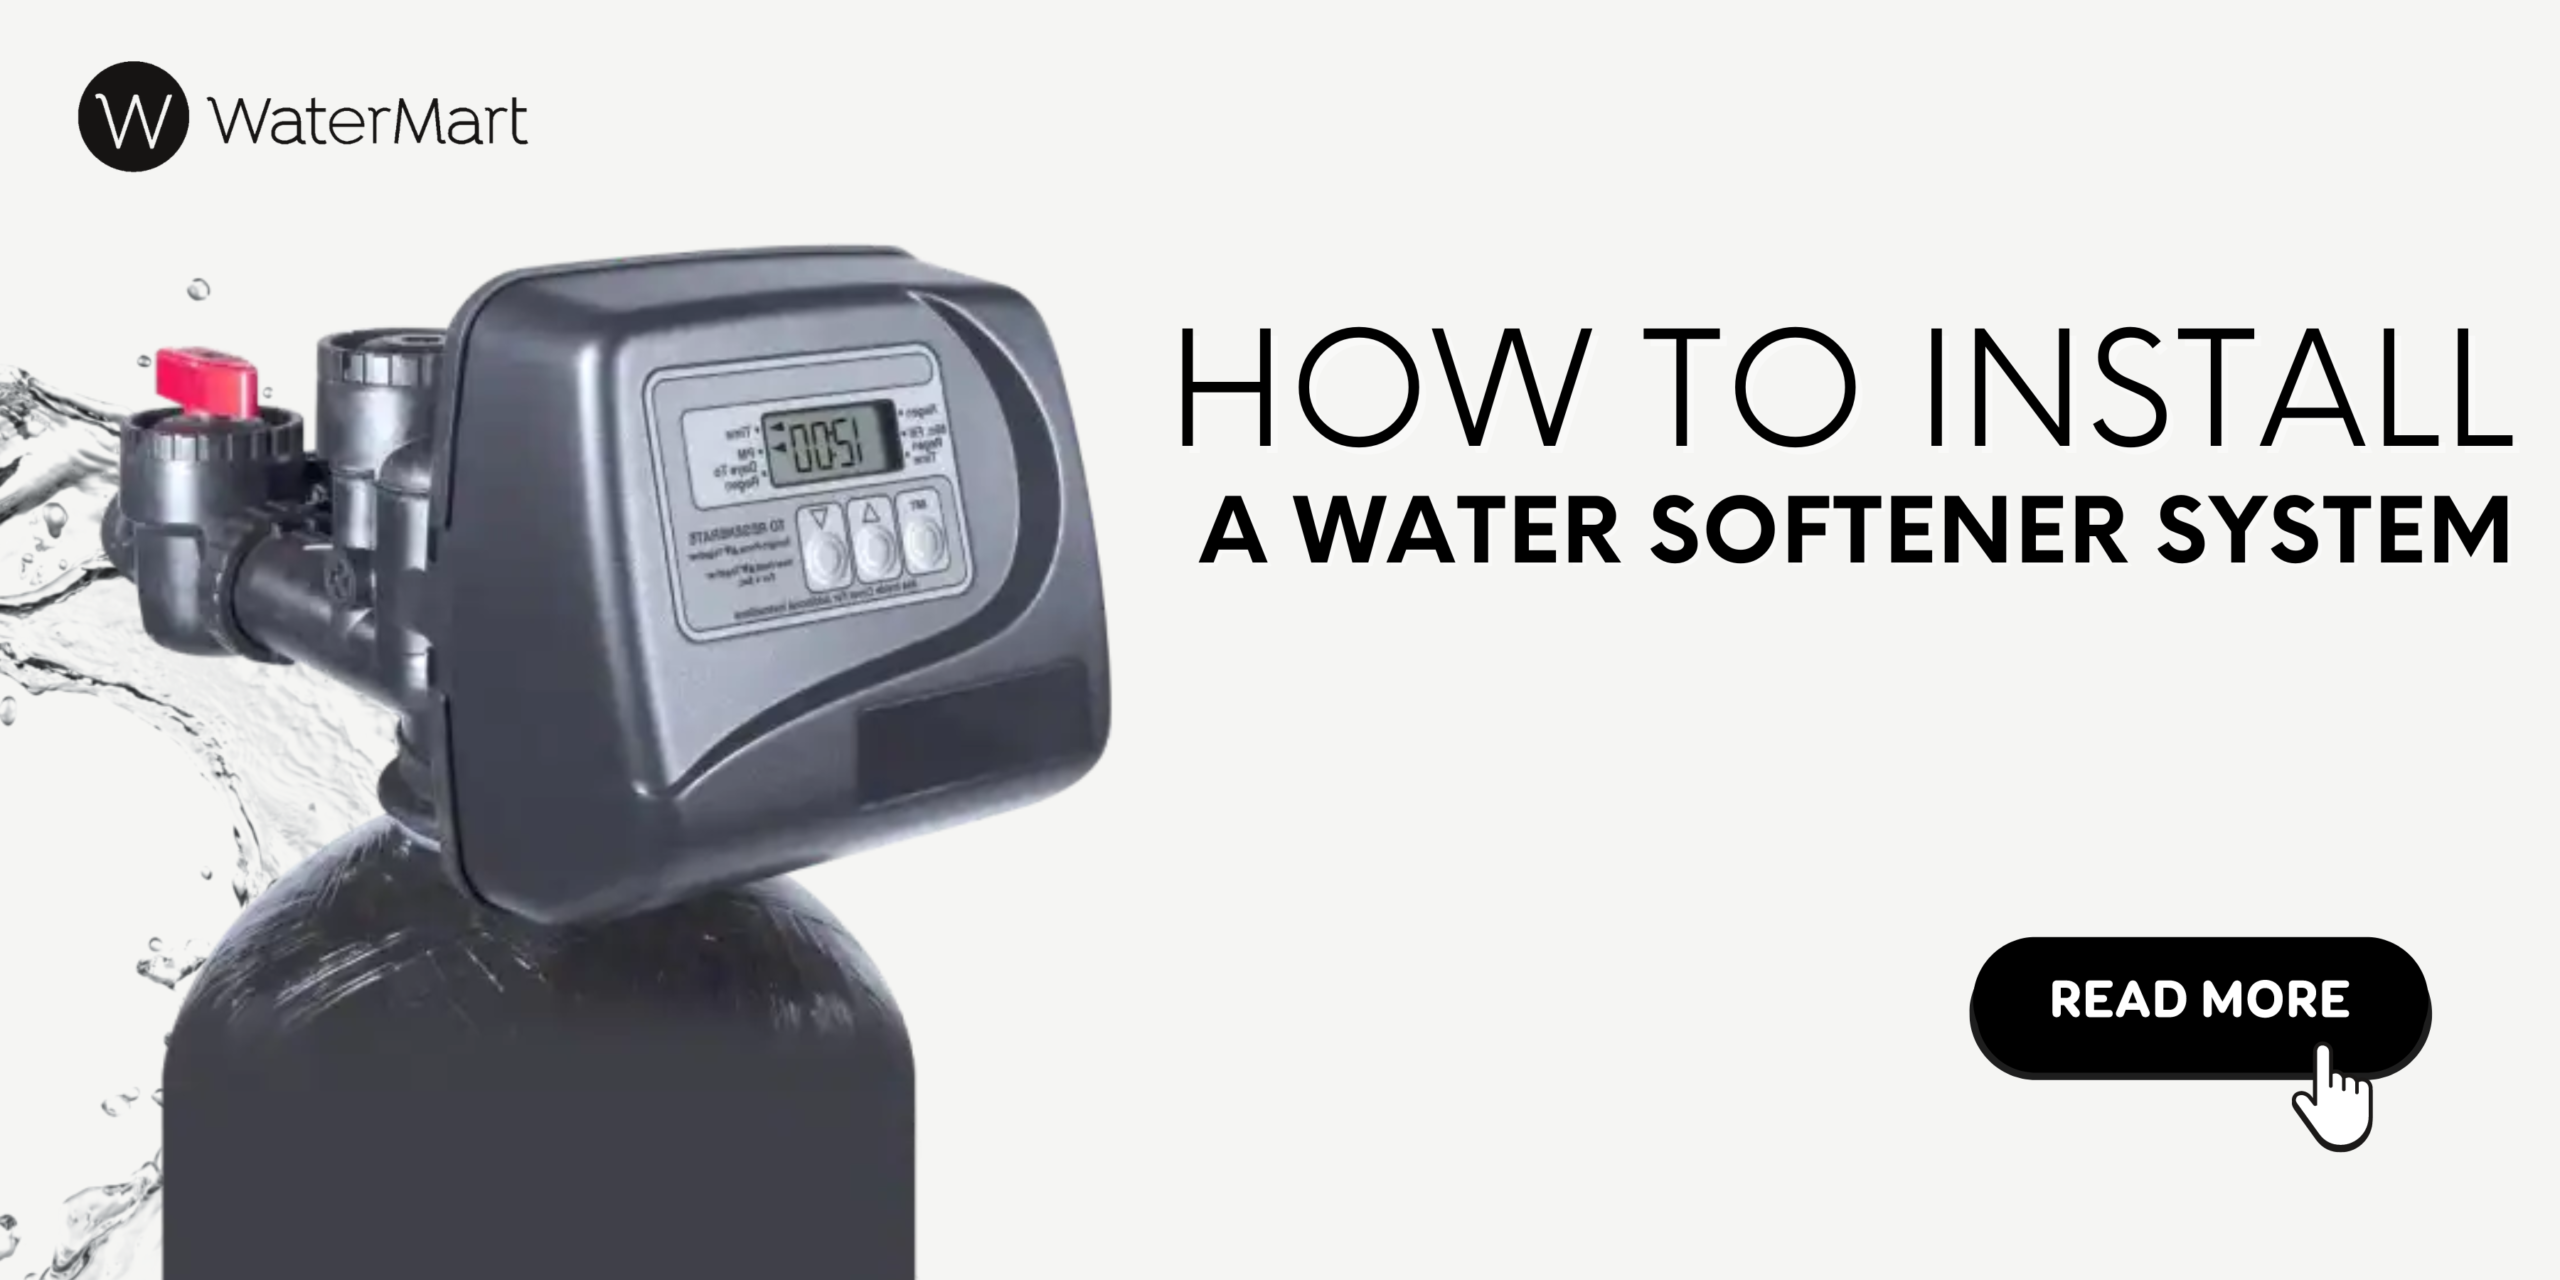 How to Install a Water Softener System – Step By Step Guide